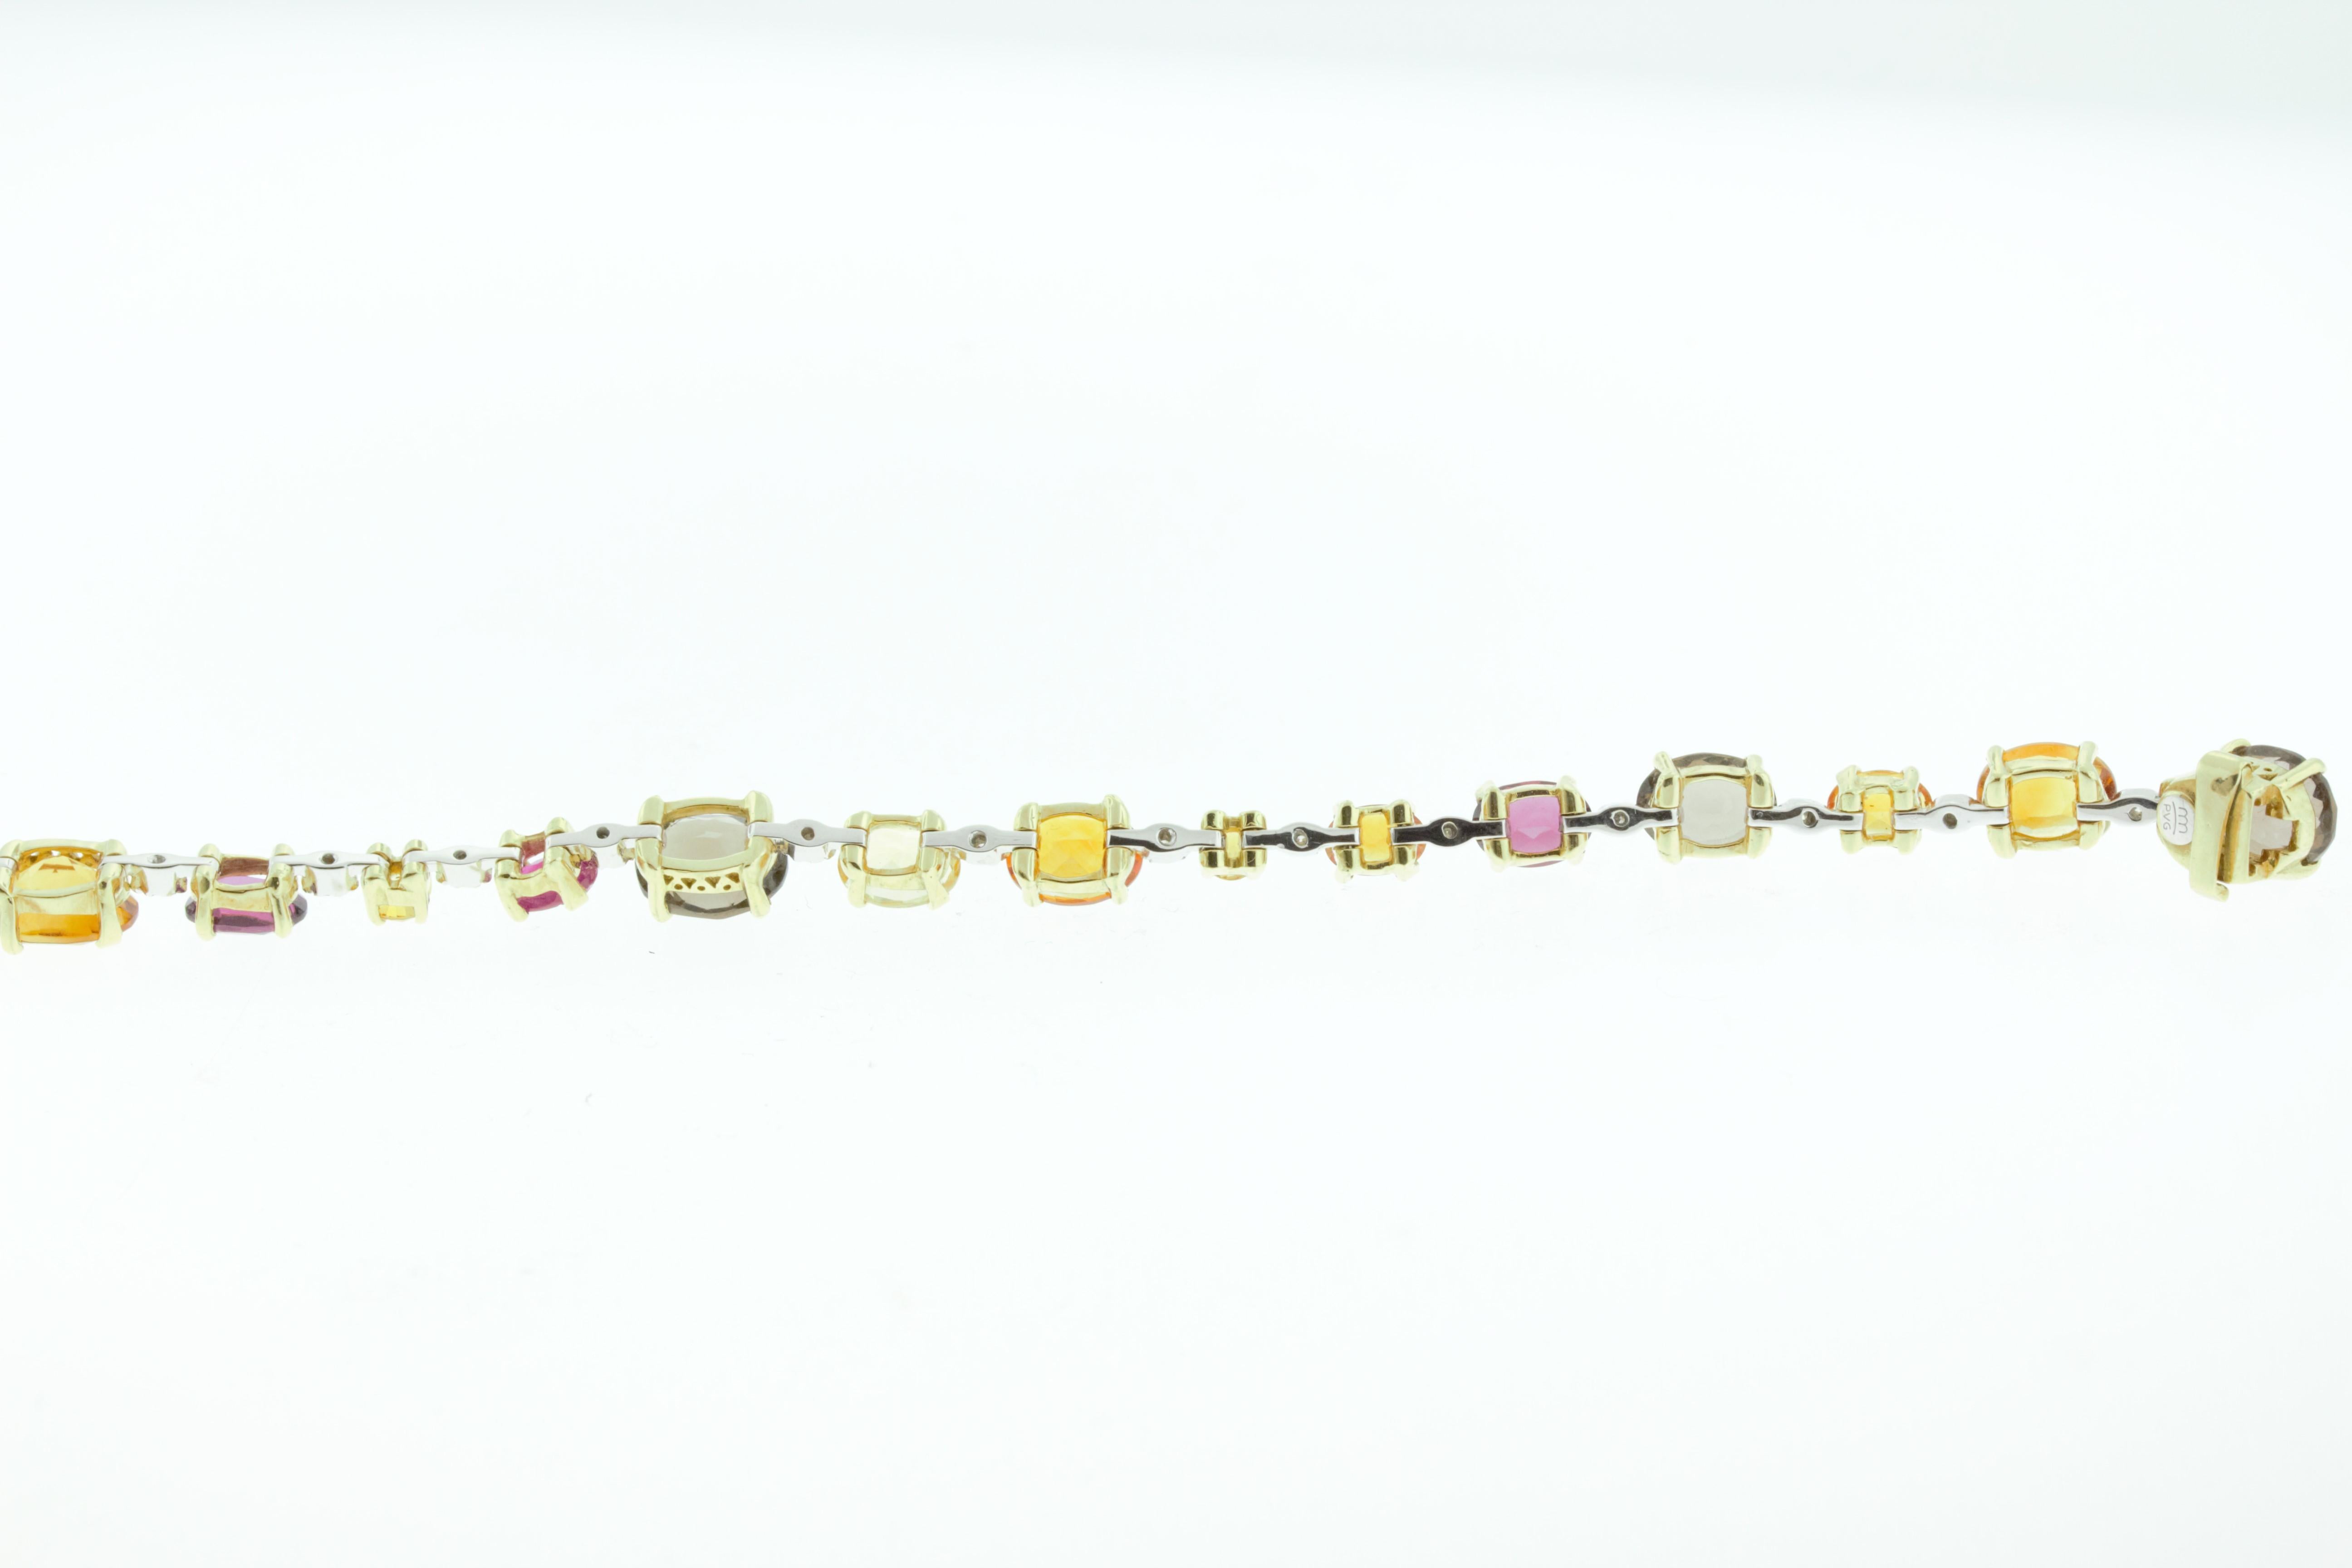 This Ponte Vecchio bracelet features 15.98 carats of sapphire, 1 carat of ruby, 0.14 carat of diamond set in 18K yellow and white gold. 14.30 grams of gold. 7 inch length. Made in Italy. 

Viewings available in our NYC showroom by appointment.